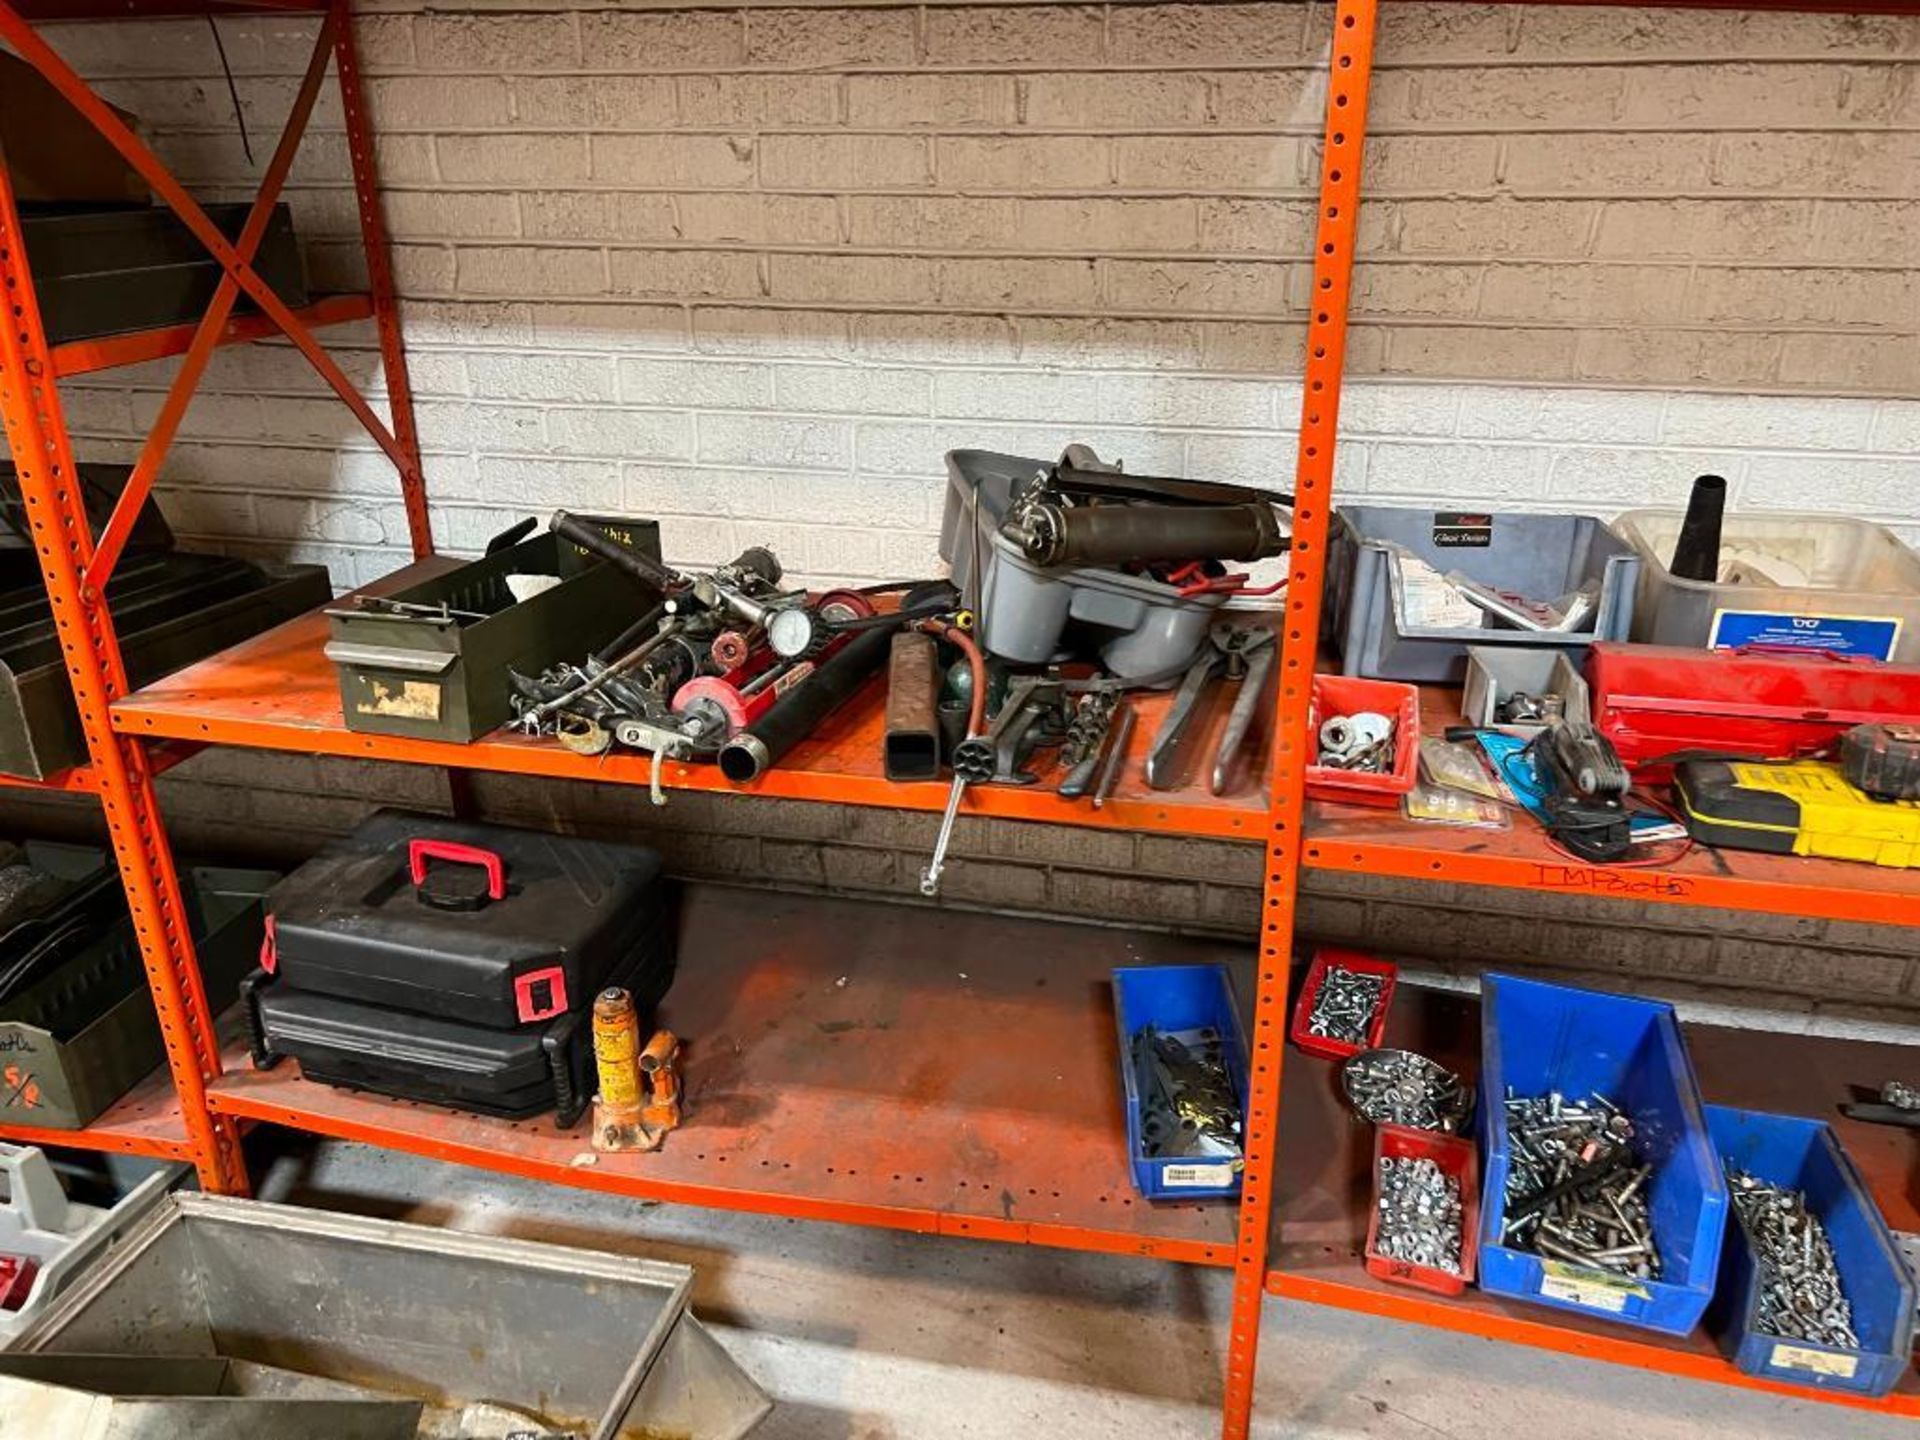 Lot: Steel Shevling Units with Contents of Assorted hand tools, Building Supplies, & Hardware - Image 7 of 9